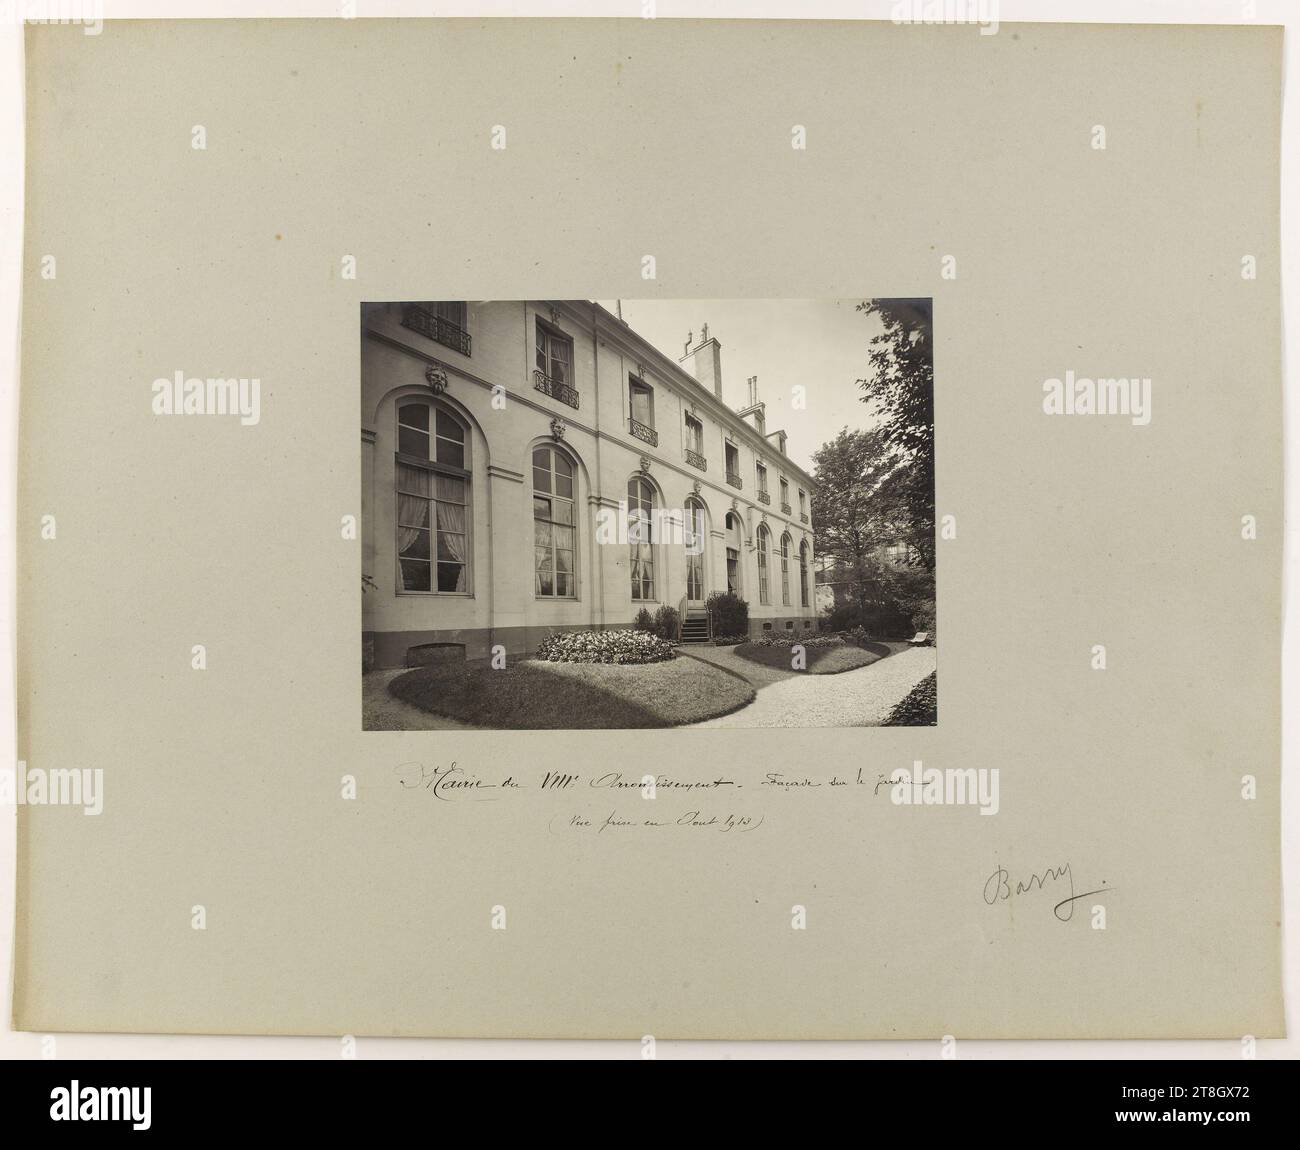 Garden side of the 8th arrondissement town hall, Paris, Barry, Jean, Photographer, En 8-1913, 20th century, Photography, Graphic arts, Photography, Gelatino silver bromide print, Dimensions - Work: Height: 16.8 cm, Width: 22.6 cm, Dimensions - Antique mount:, Height: 40 cm, Width: 49.9 cm Stock Photo